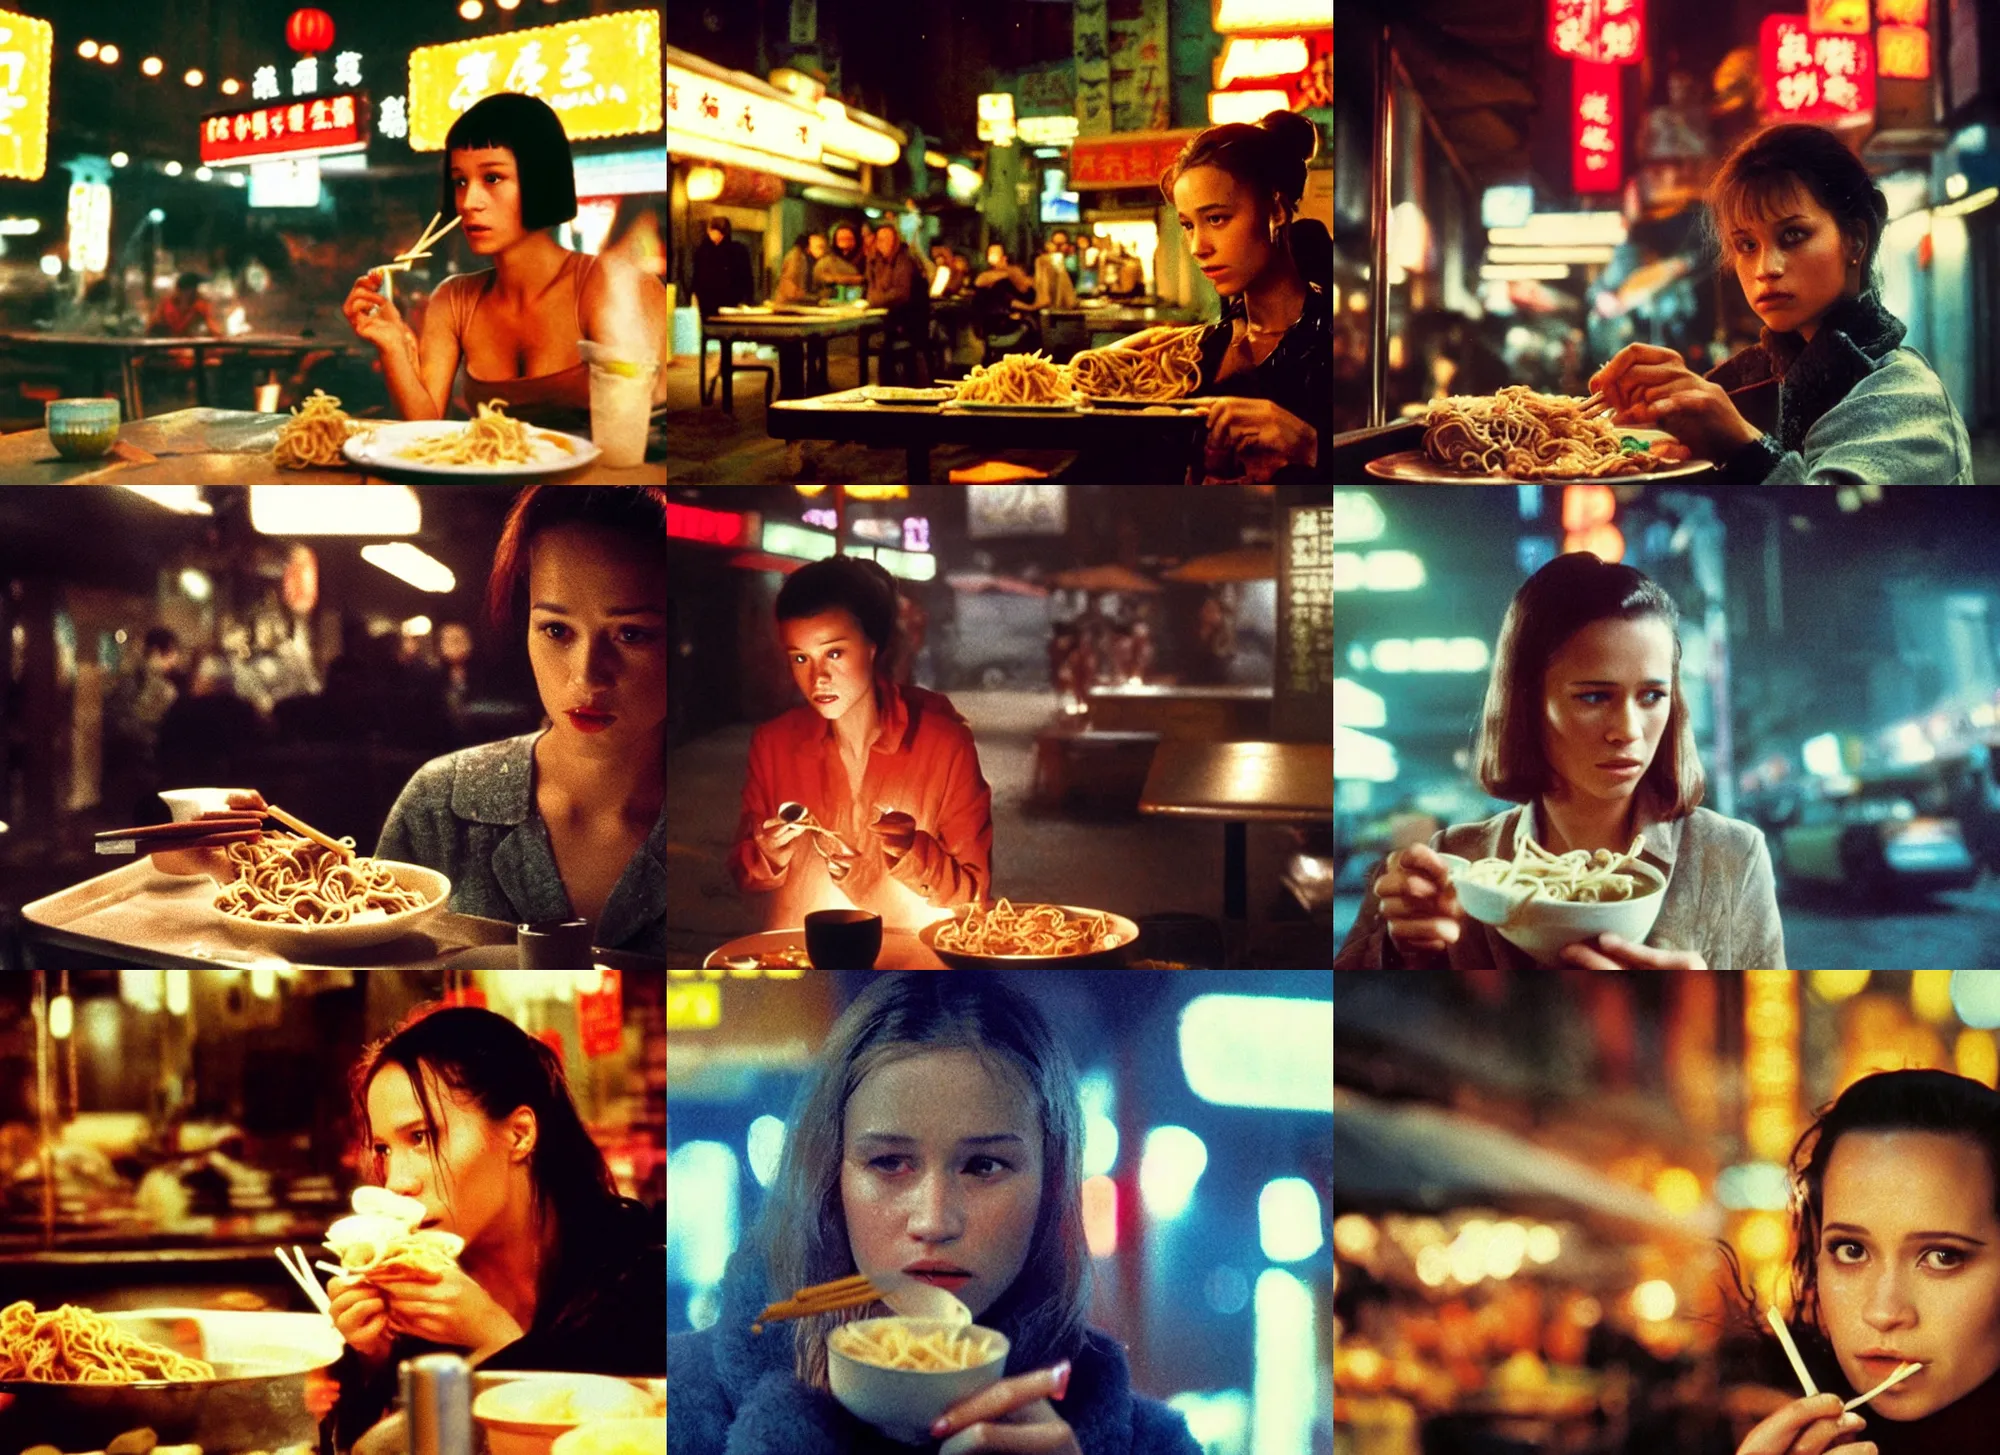 Prompt: A close-up, color outdoor film still of a Alicia Amanda Vikander Eating noodles at a Chinese food stall, ambient lighting at night, from Blade Runner(1982).